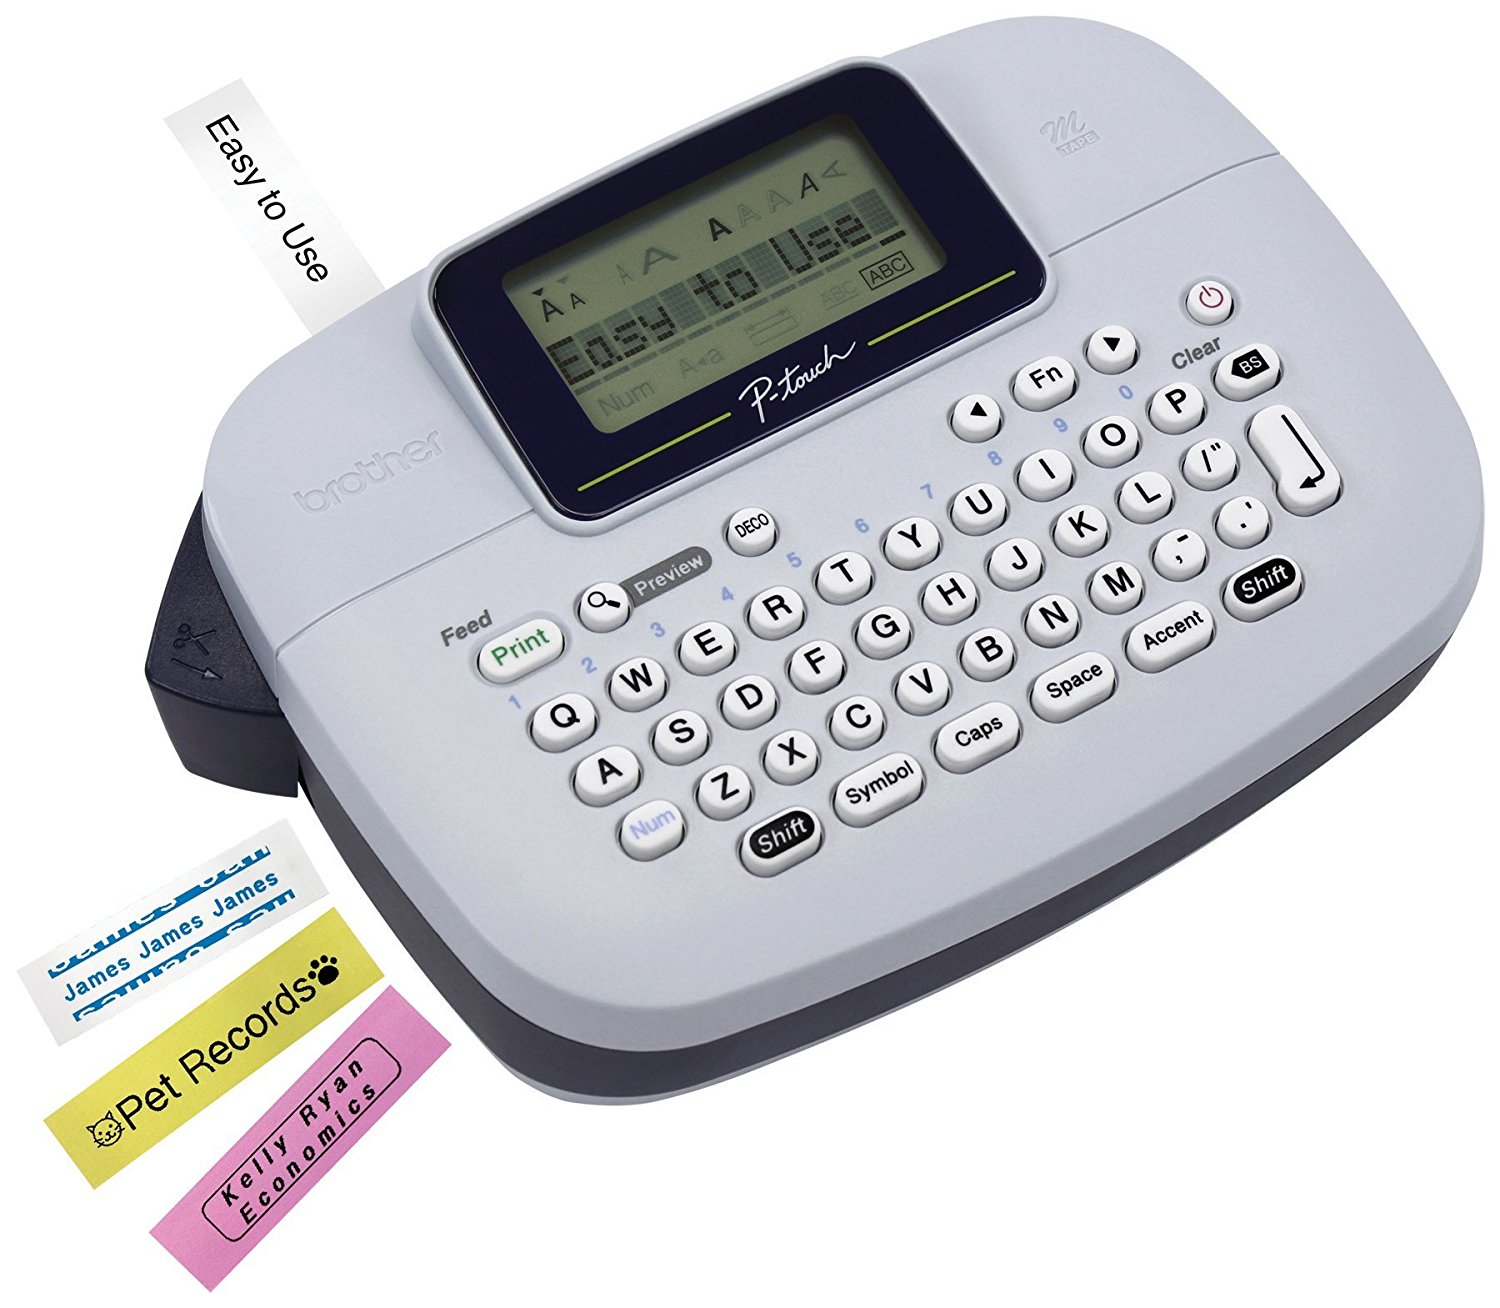 Brother P-touch Handy Label Maker Only $9.99! (Reg $26.05)